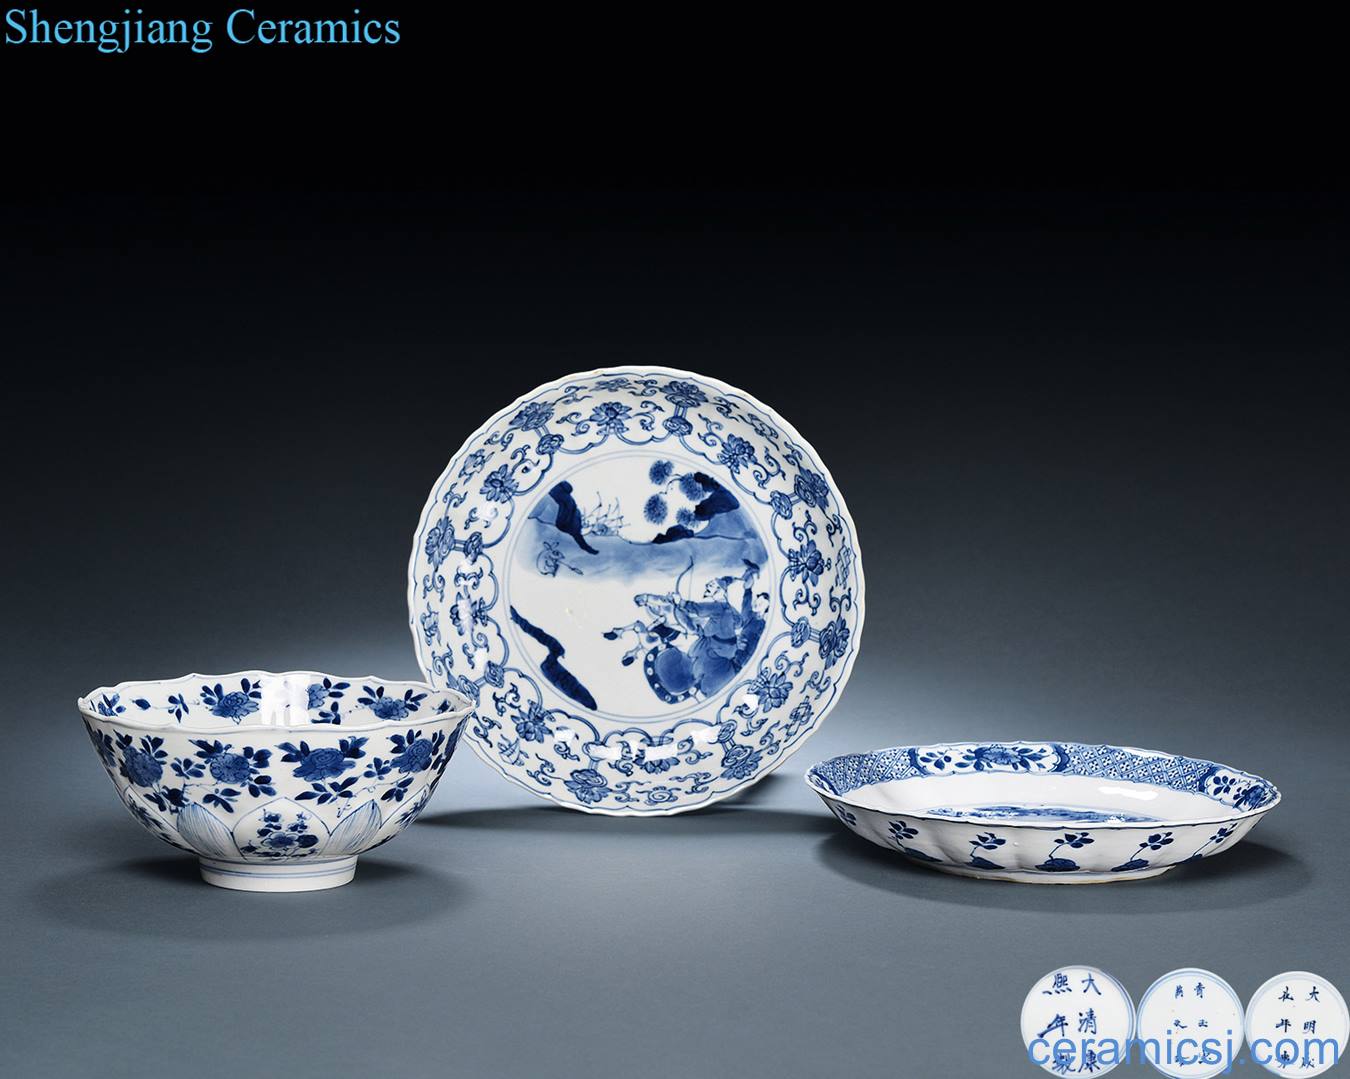 The qing emperor kangxi Blue and white flower dish, bowl three story characters